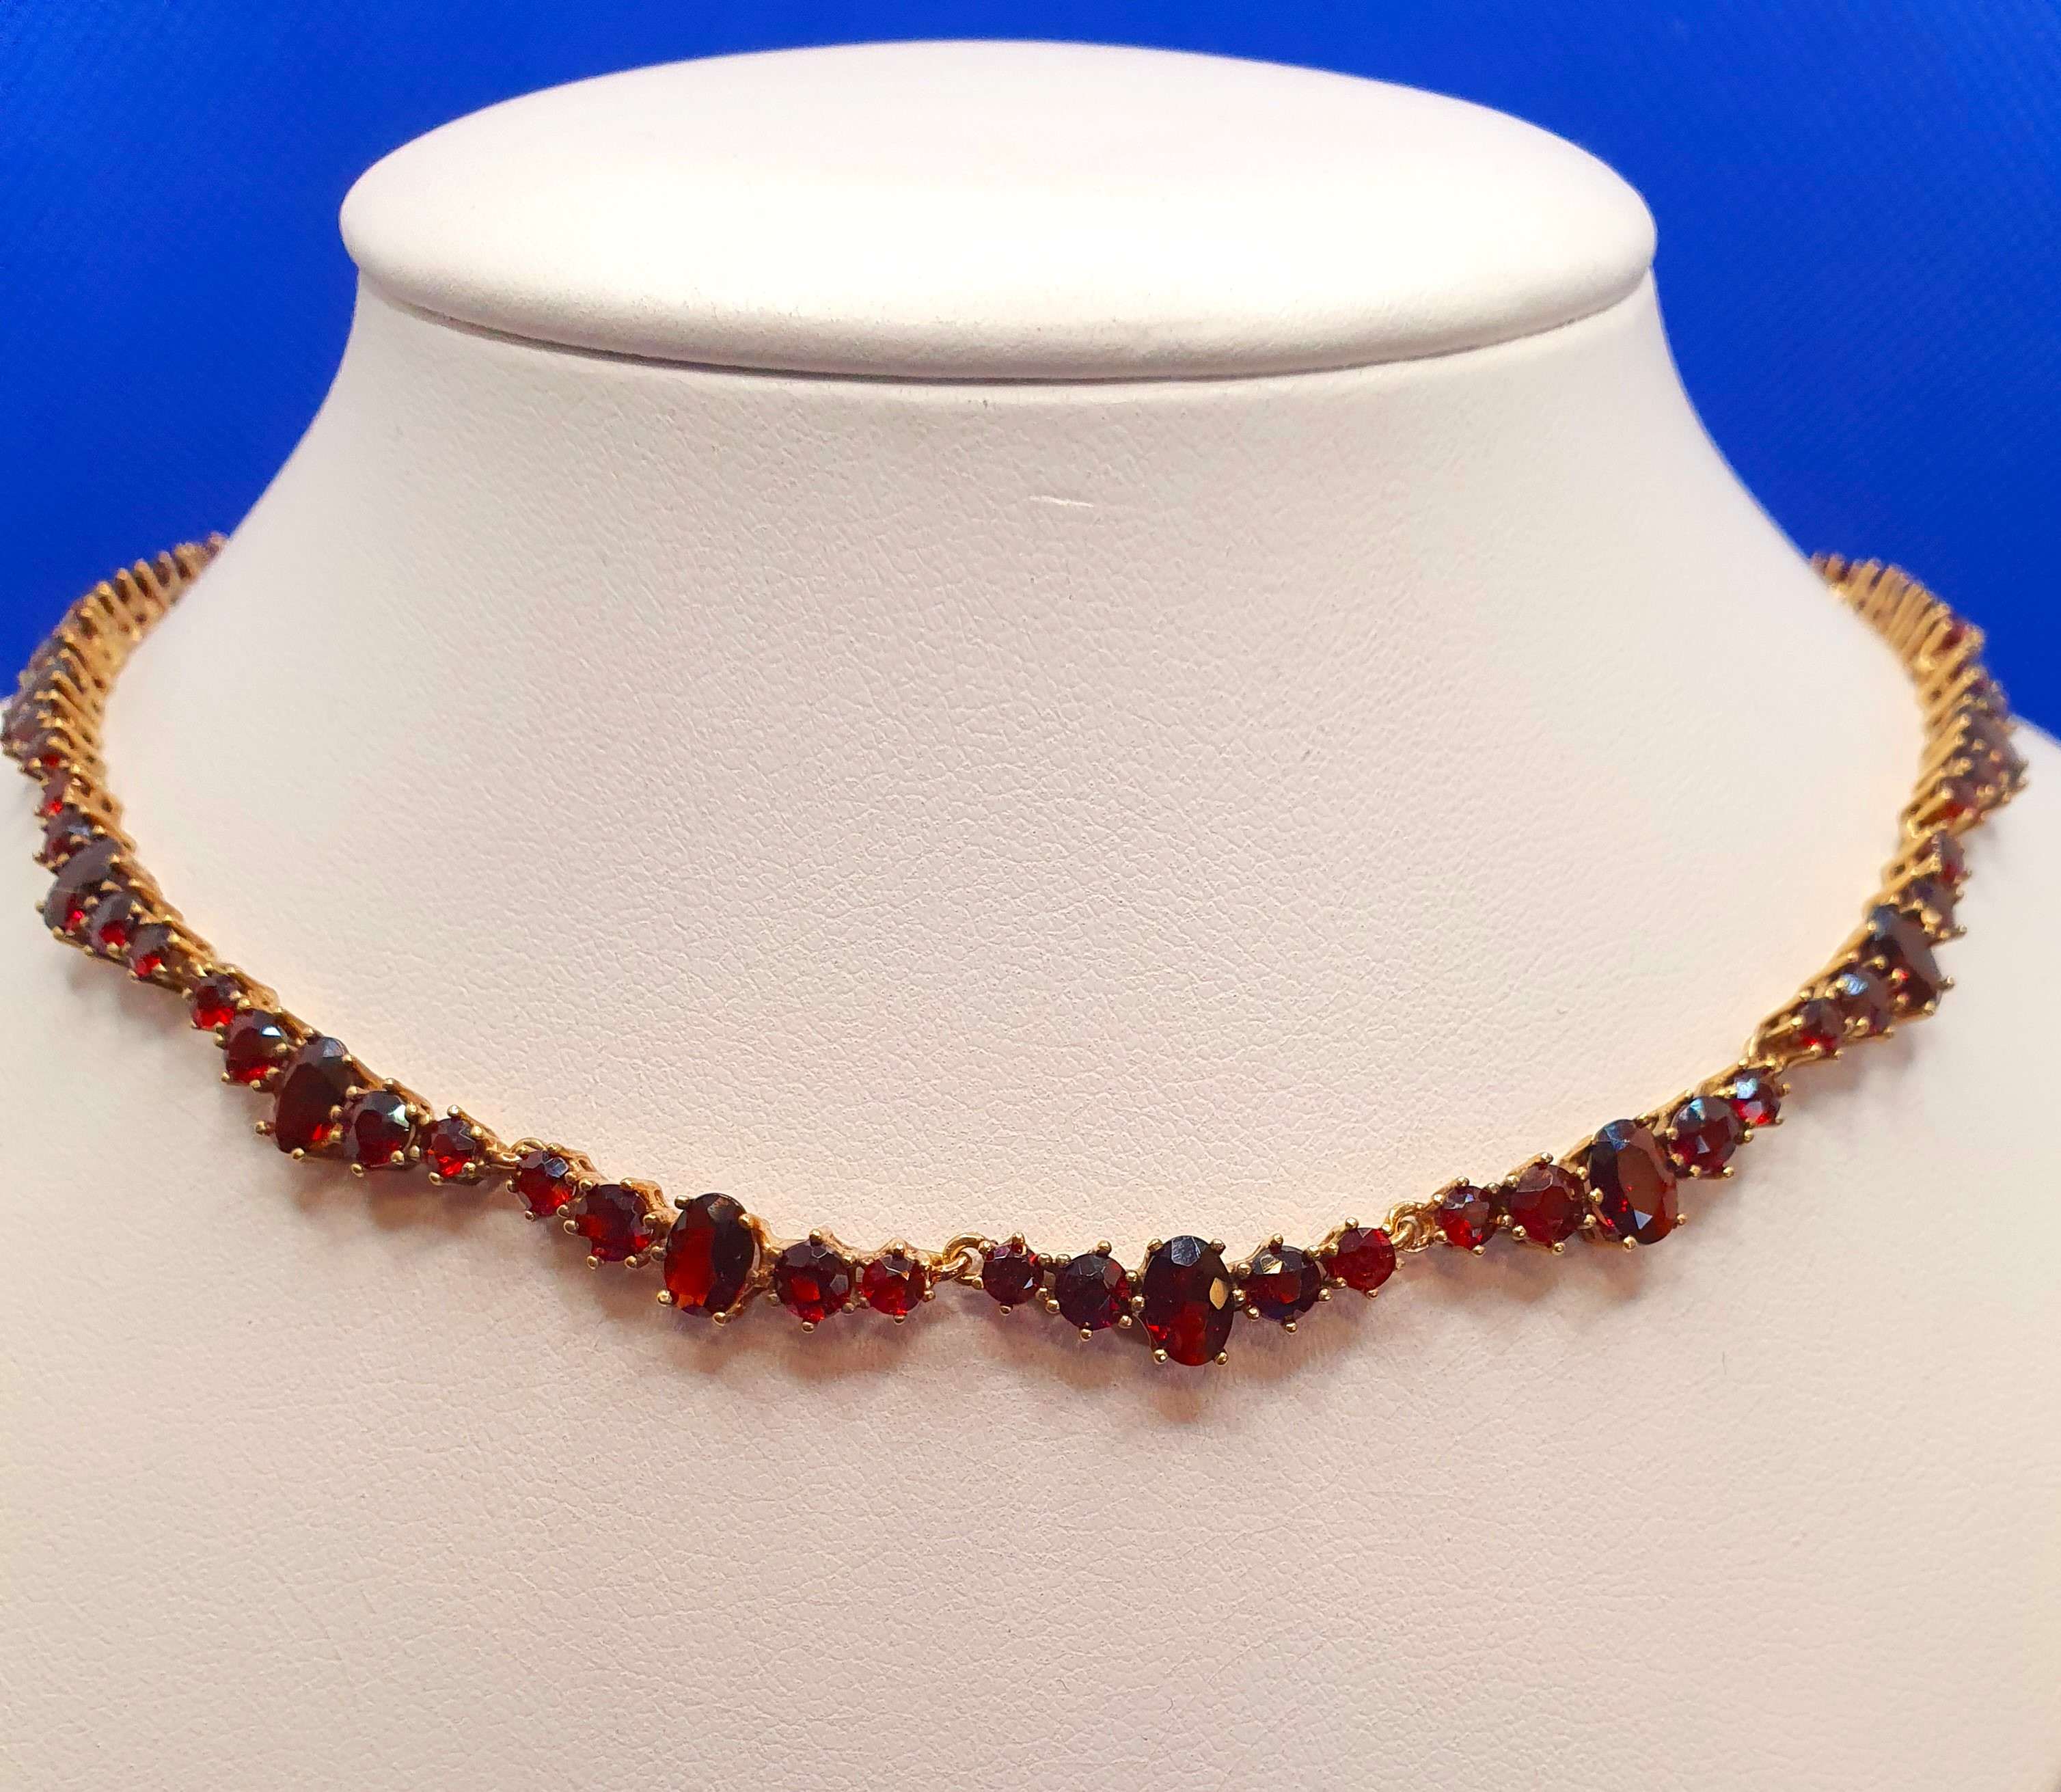 9ct Gold Garnet Necklace. Length is 16 inches and weight is 20g